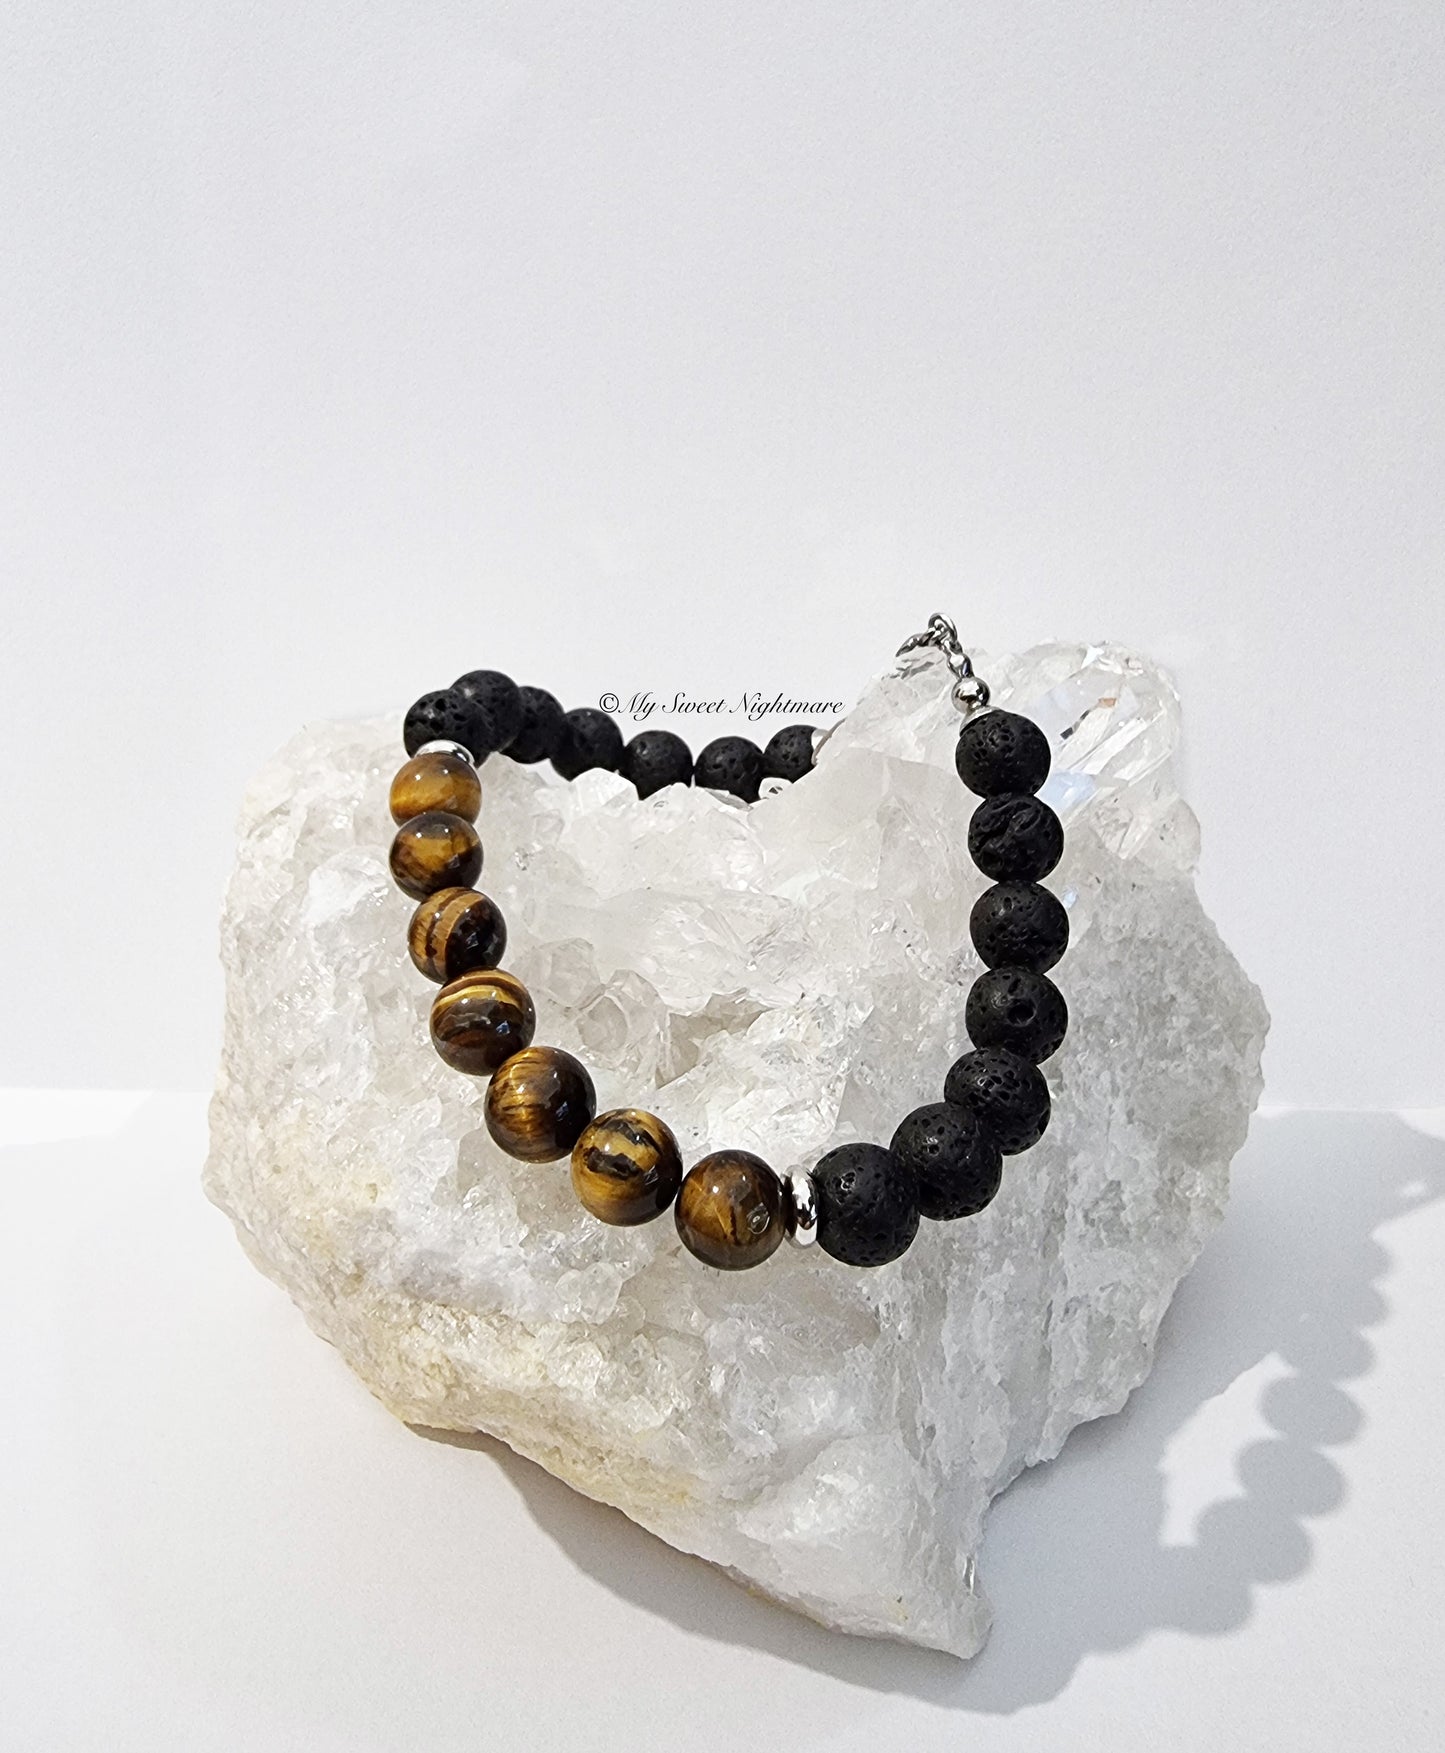 Bracelet with Tiger's Eye and Lava Stone